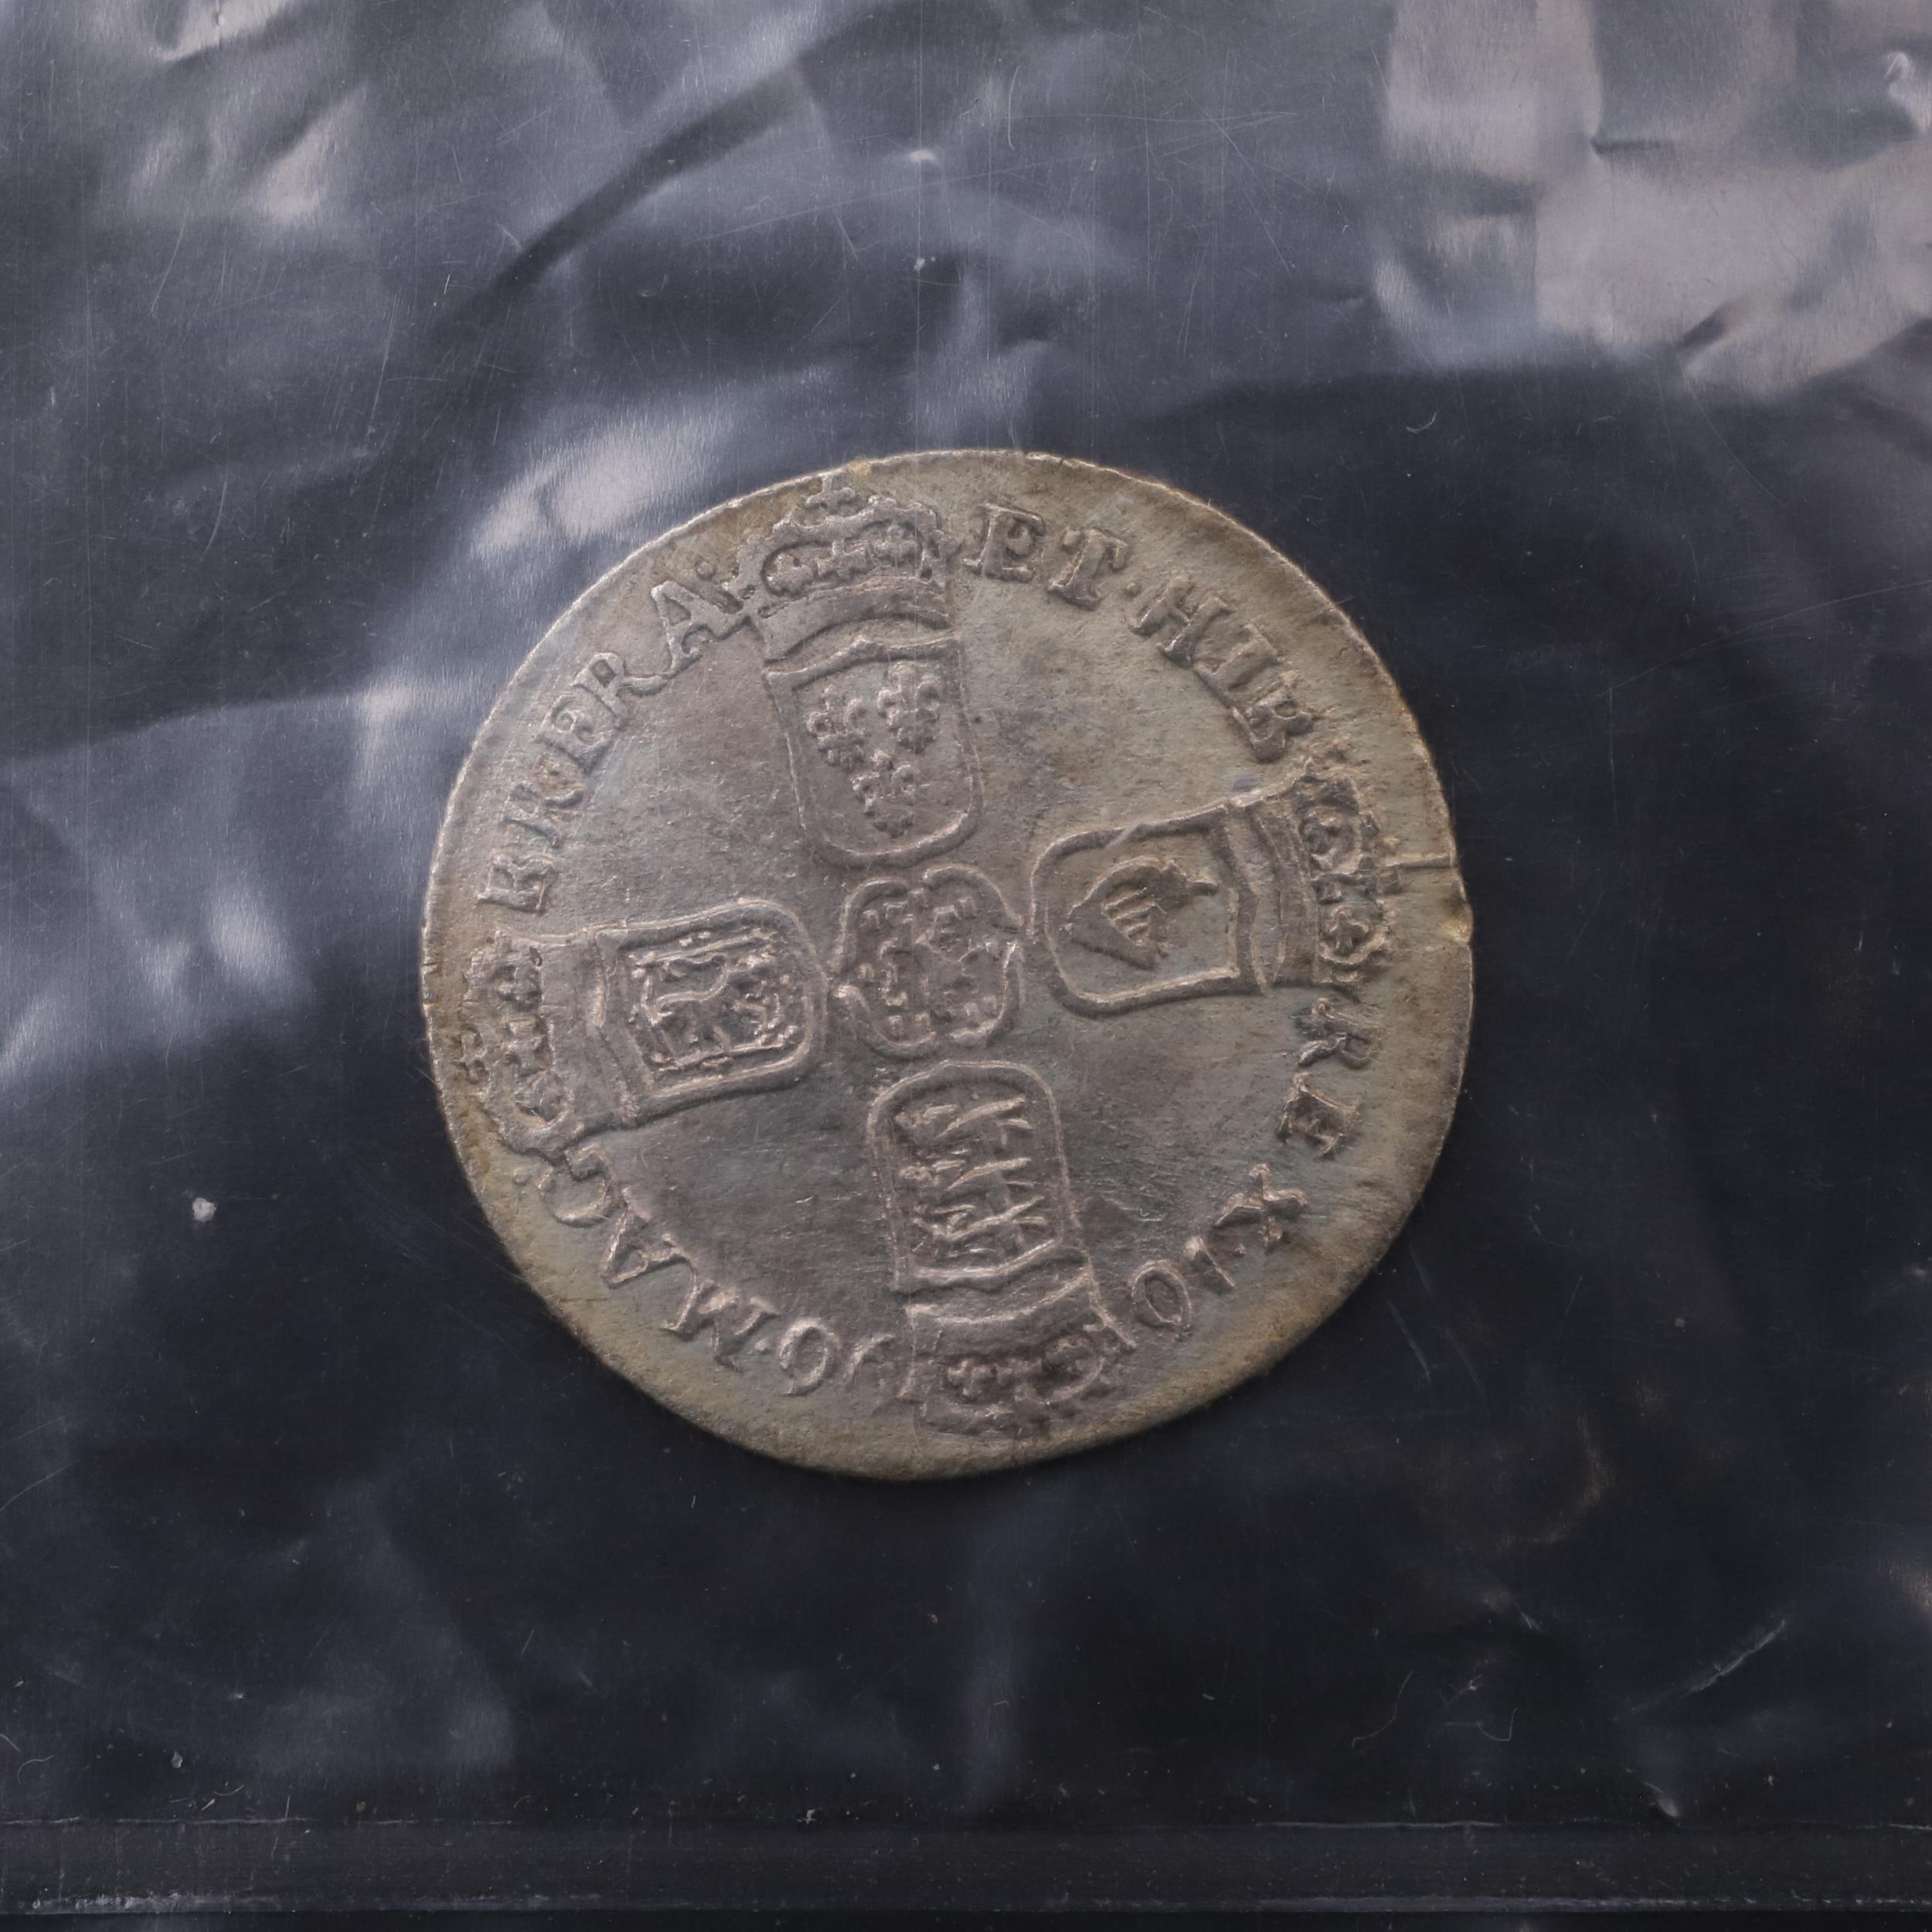 A WILLIAM III SIXPENCE, 1696, FROM THE WRECK OF THE ASSOCIATION. - Image 2 of 5